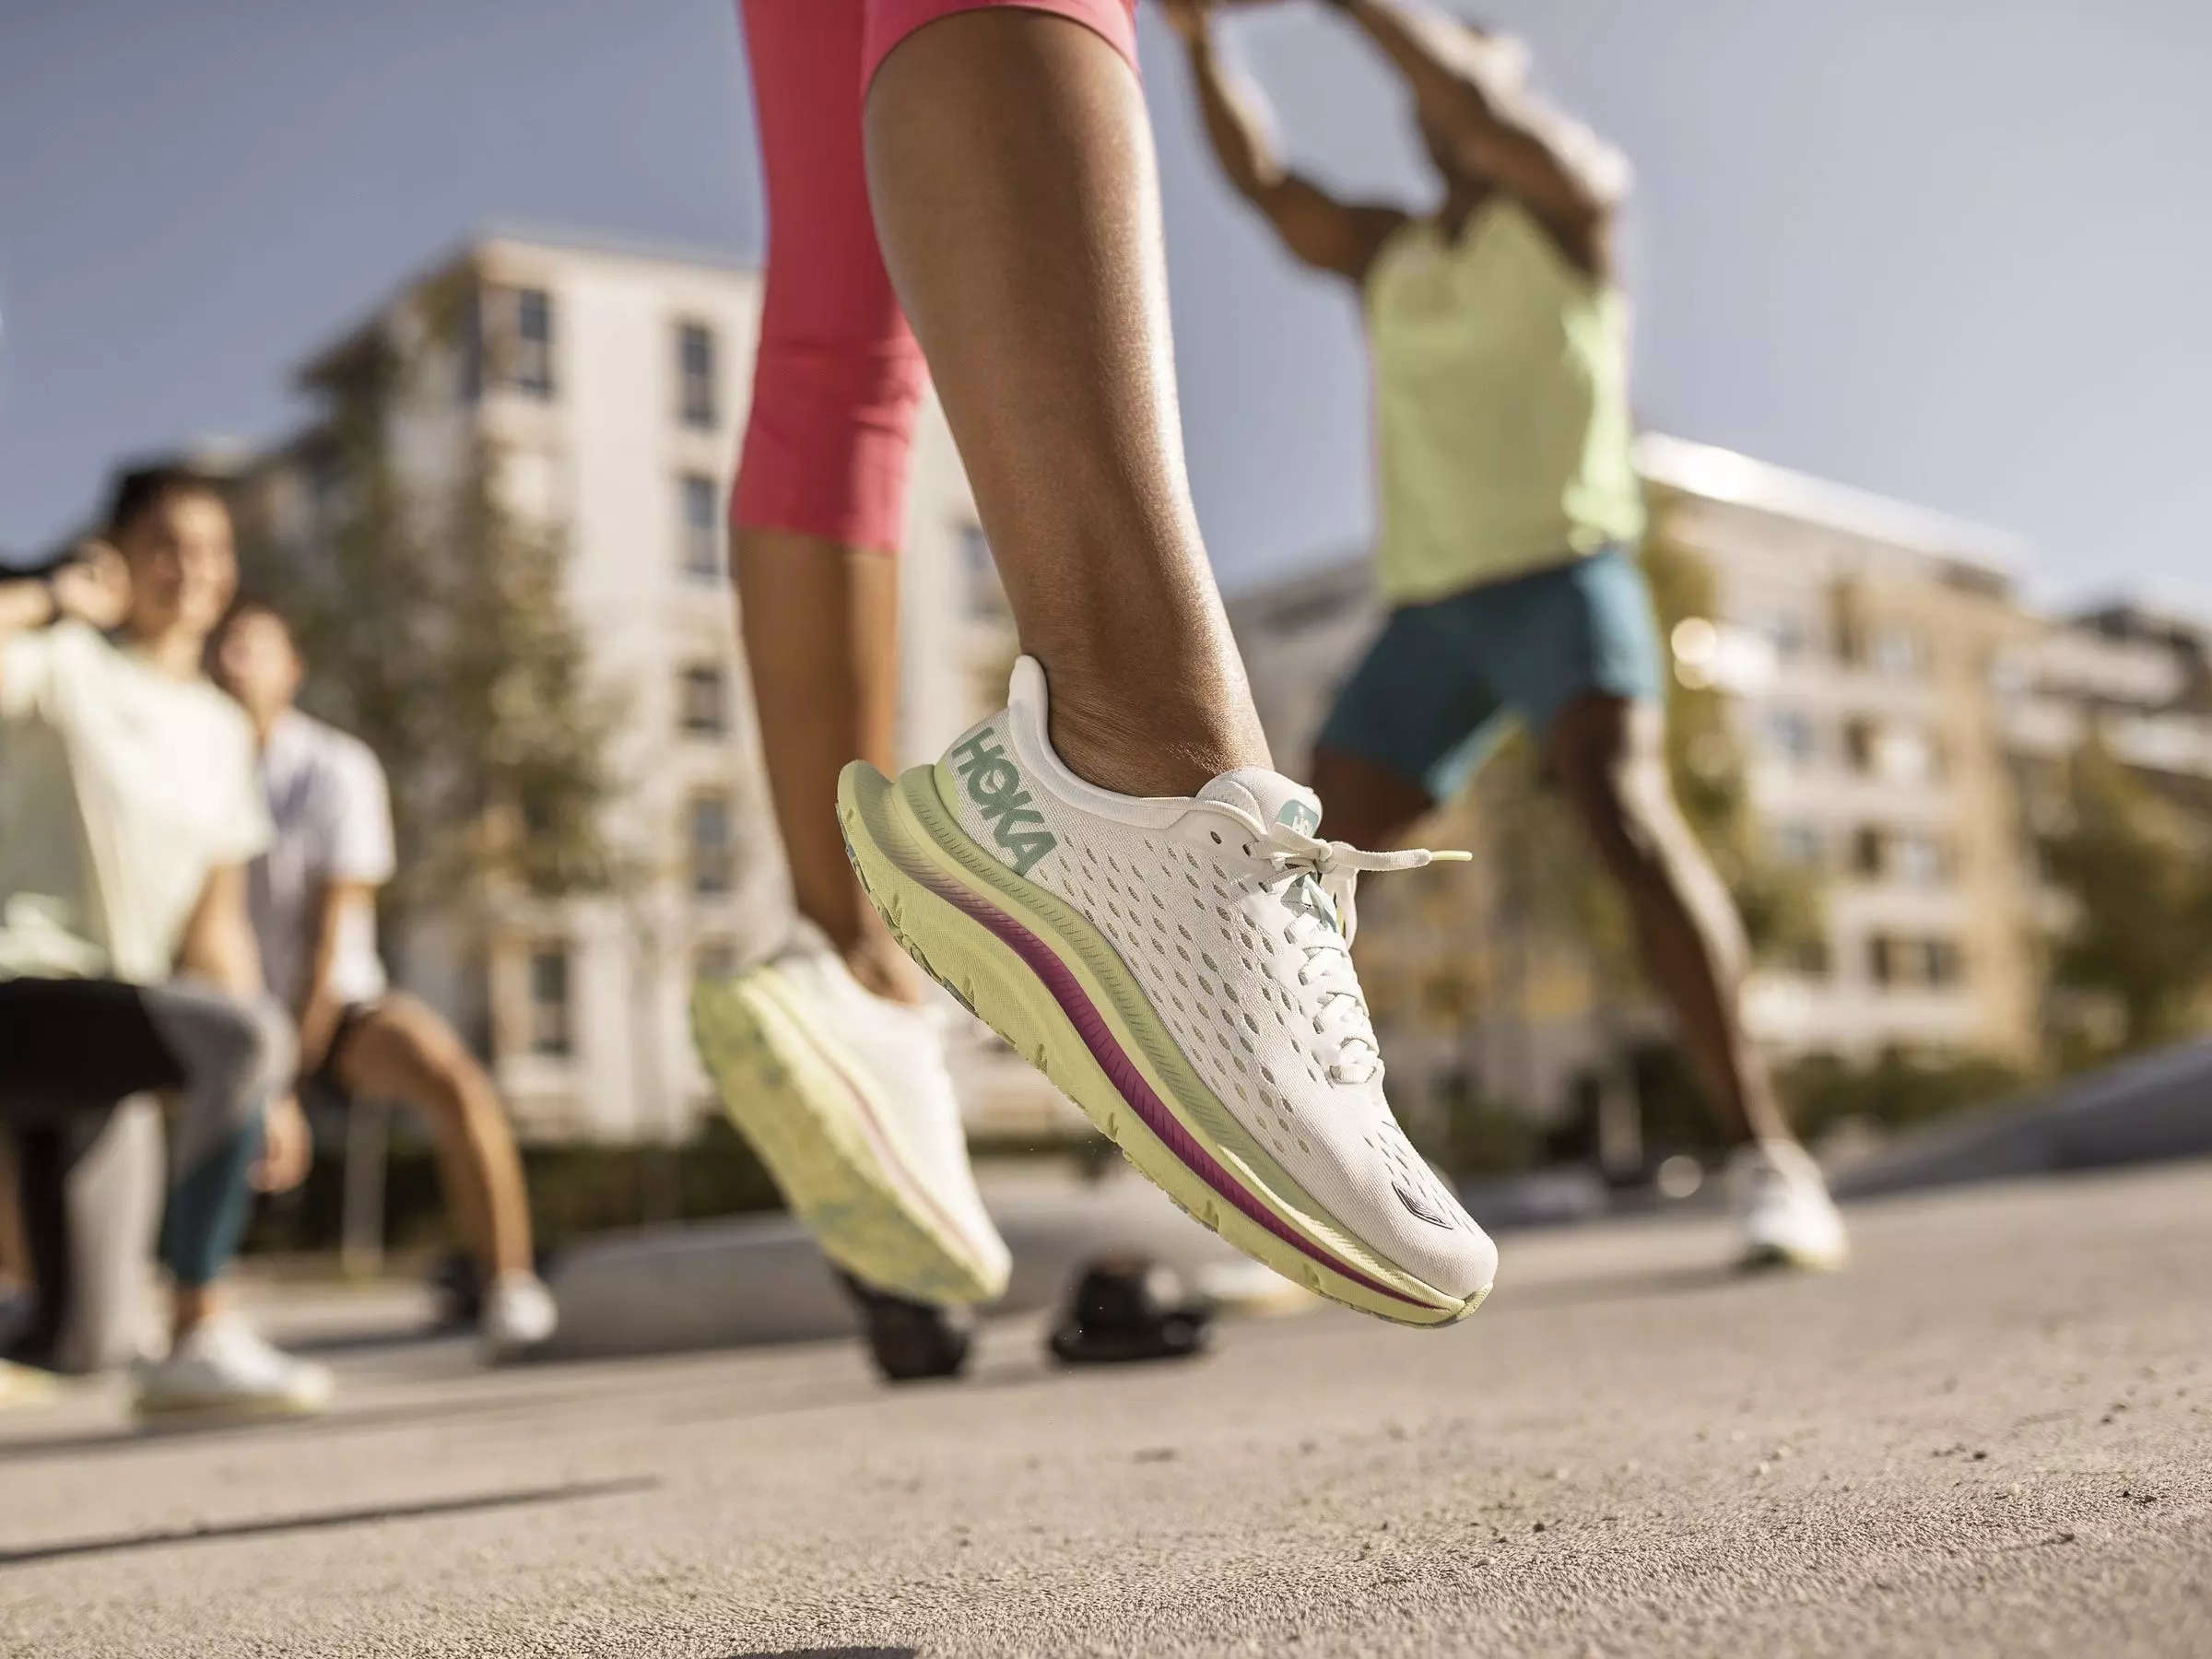 Love them or hate them, Hoka's chunky sneakers are hot. Just ask Gen Z ...